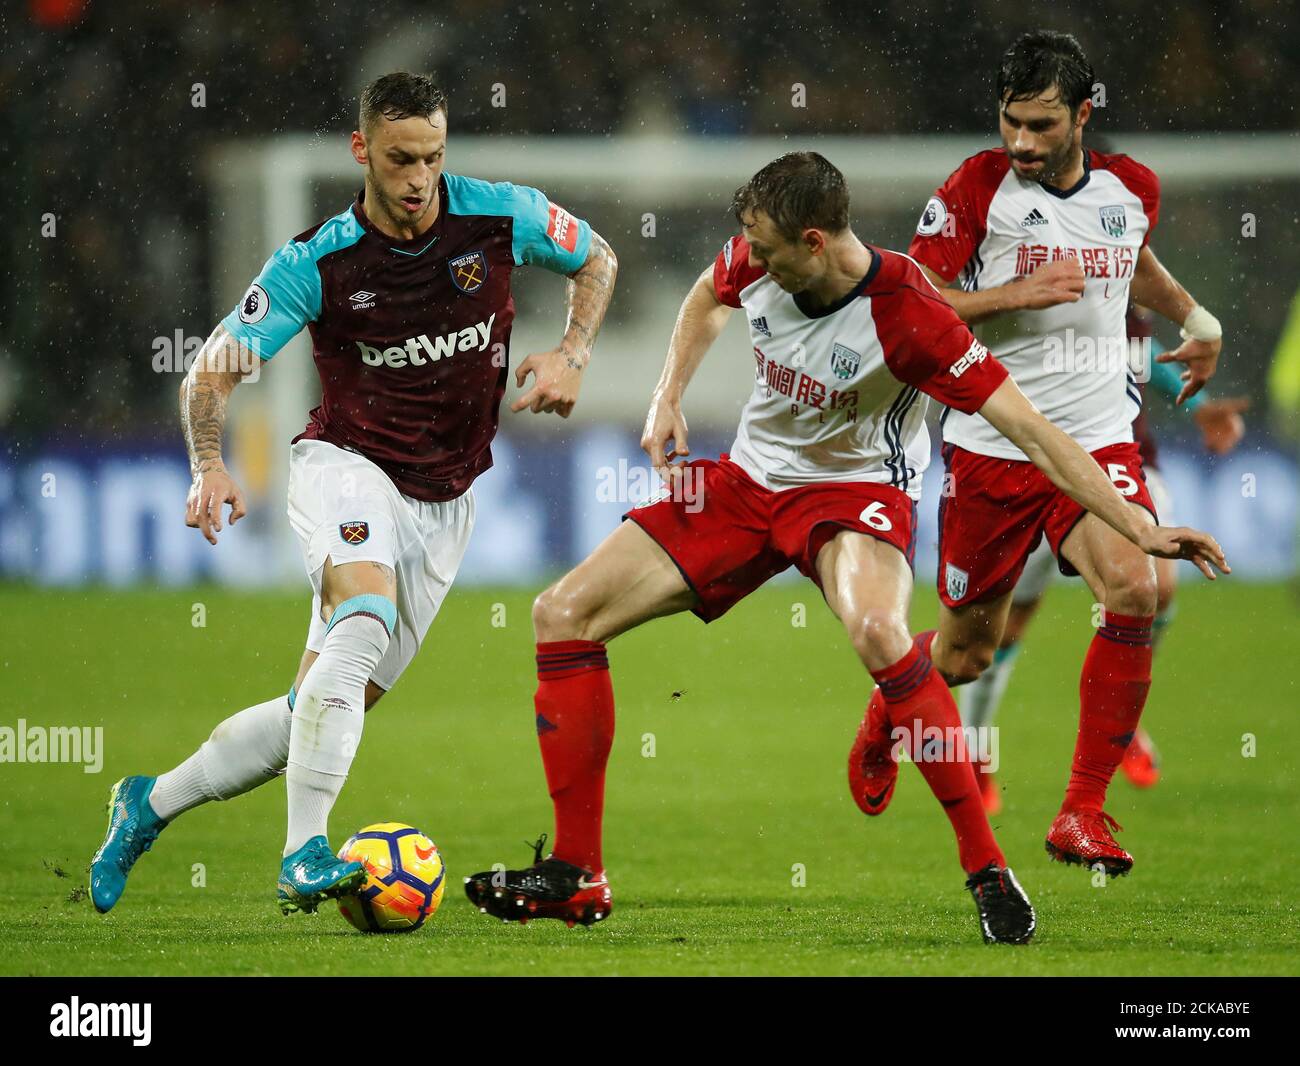 Soccer Football - Premier League - West Ham United vs West Bromwich Albion - London Stadium, London, Britain - January 2, 2018   West Ham United's Marko Arnautovic in action with West Bromwich Albion's Jonny Evans   REUTERS/Eddie Keogh    EDITORIAL USE ONLY. No use with unauthorized audio, video, data, fixture lists, club/league logos or 'live' services. Online in-match use limited to 75 images, no video emulation. No use in betting, games or single club/league/player publications.  Please contact your account representative for further details. Stock Photo